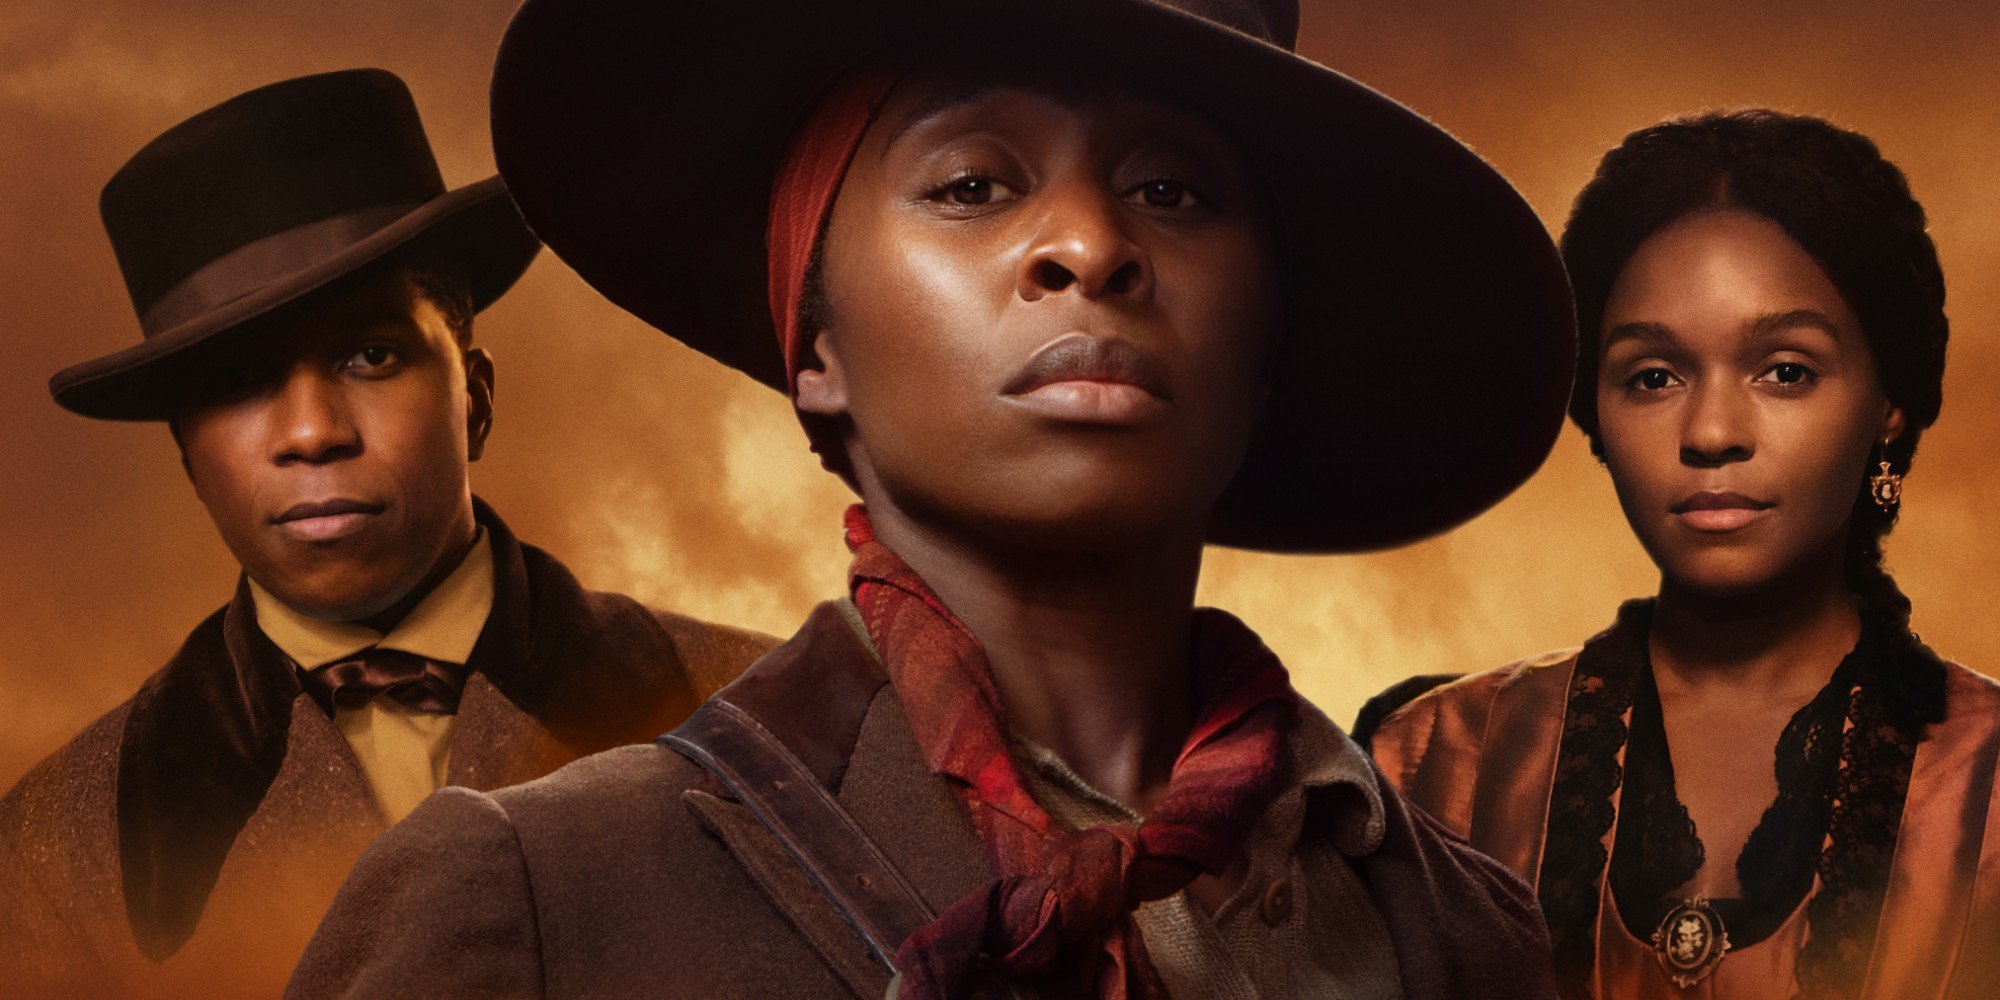 ‘Harriet’ Wields A Powerful And Much-Needed Story. But It’s Missing Tubman’s True Humanity.